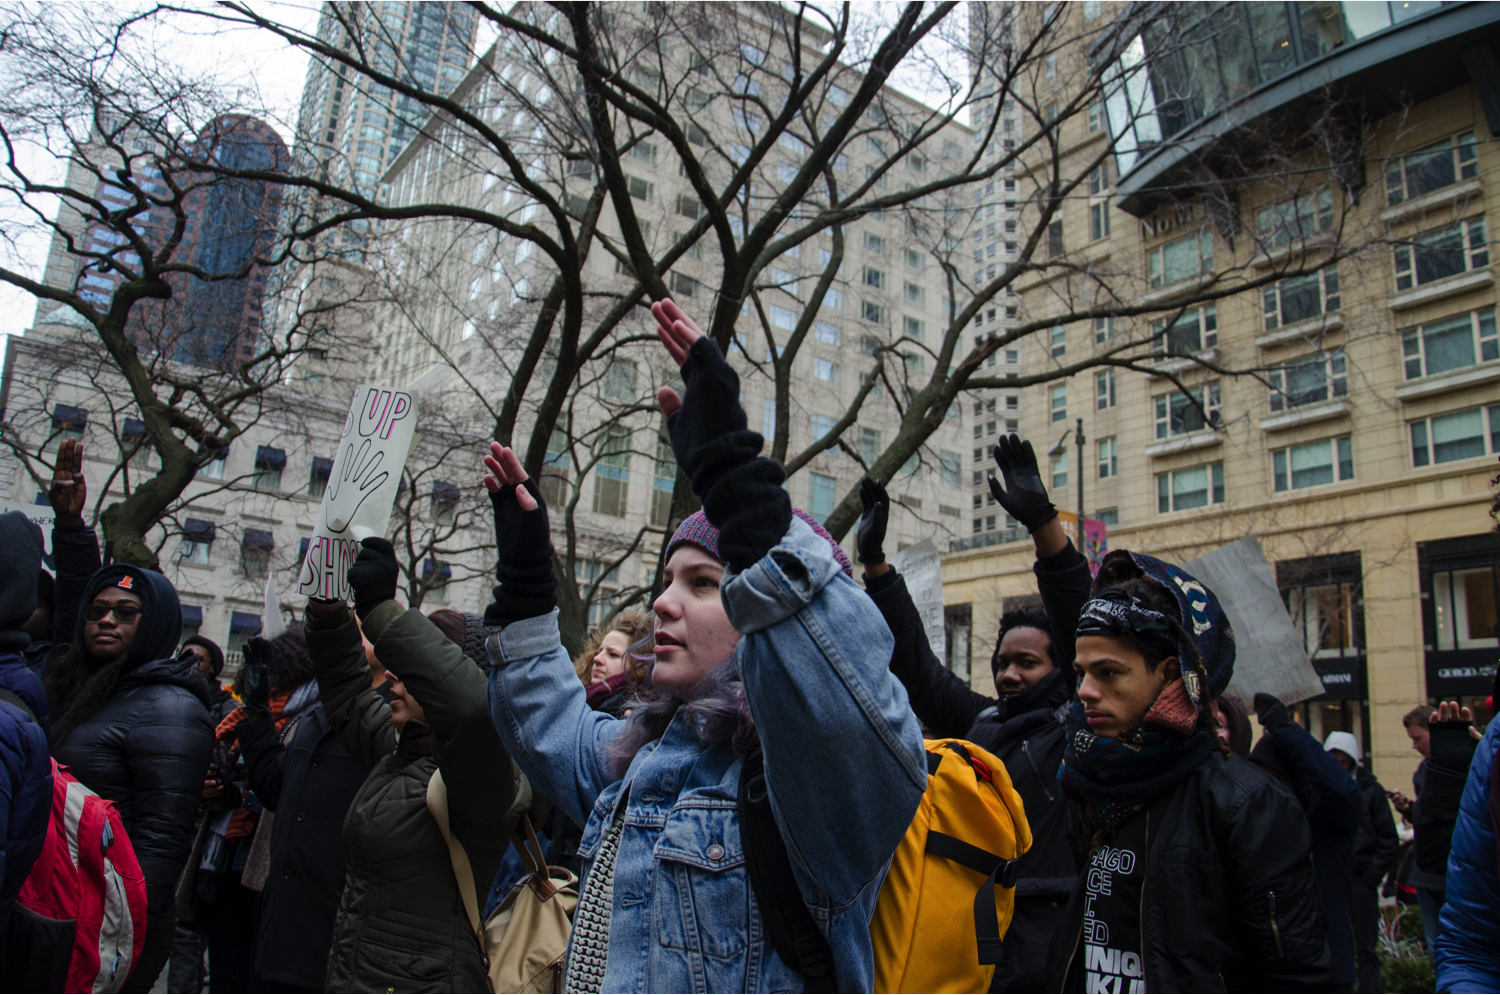 Protesters raise their hands to express one of the core ideas of this demonstration: “Hands up. Don’t shop.” They said keeping wallets shut is a show of solidarity for Michael Brown. (Jin Wu/Medill)